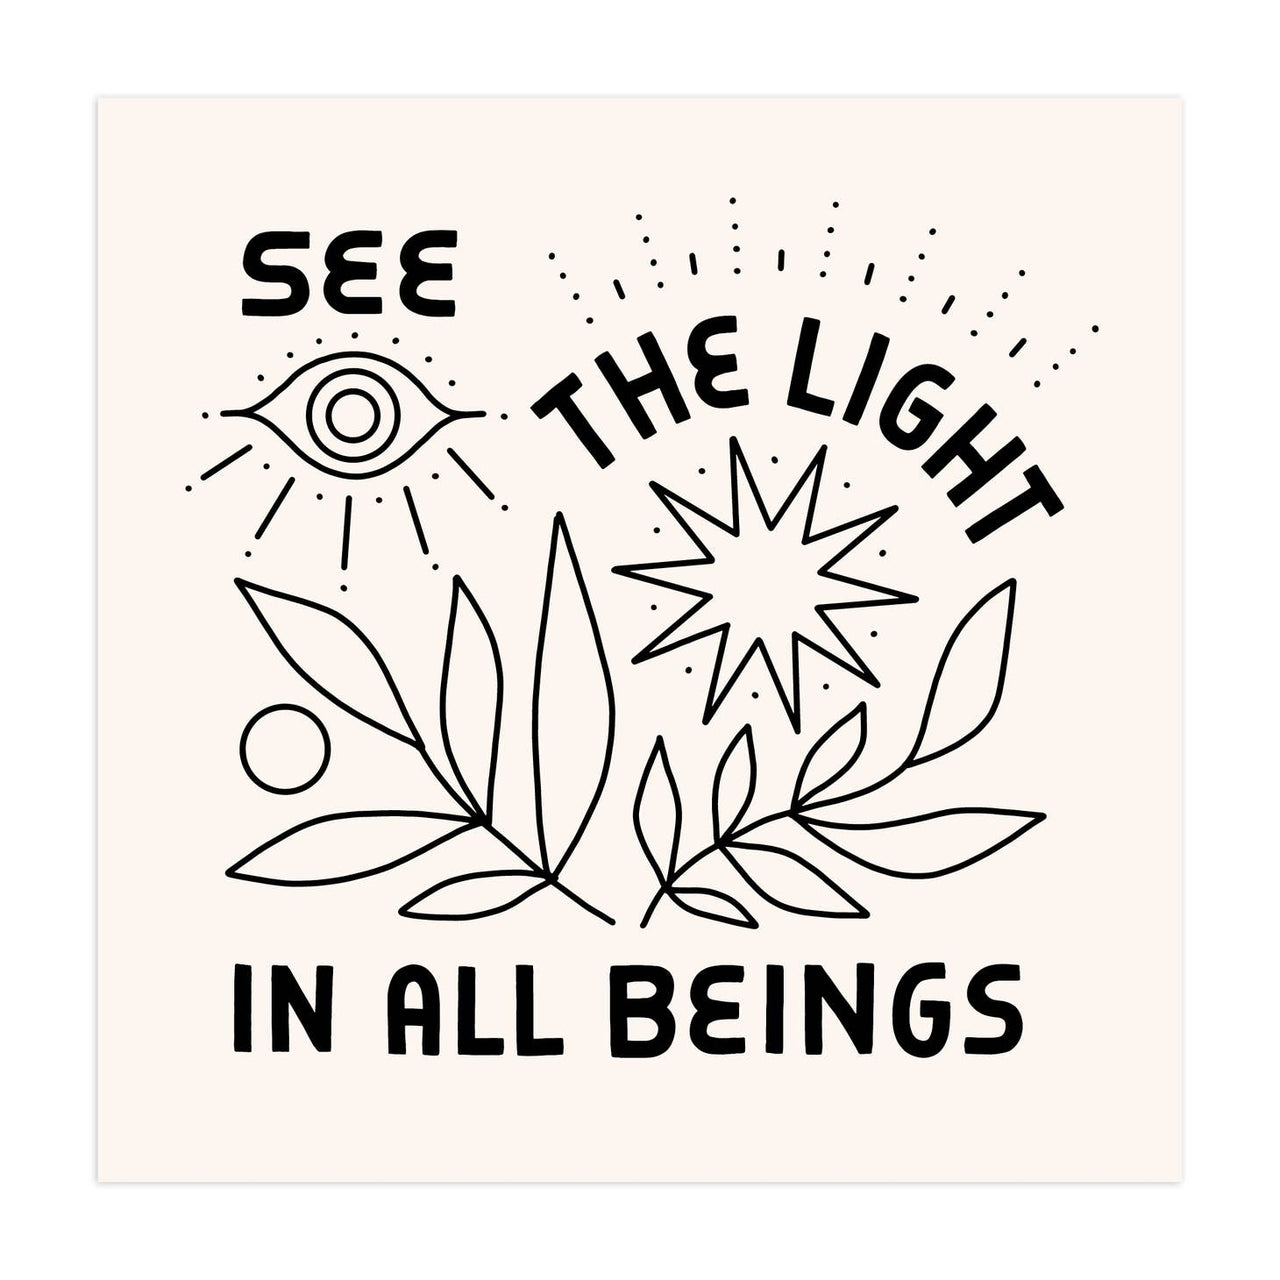 Worthwhile - See The Light Print (12" x 12")